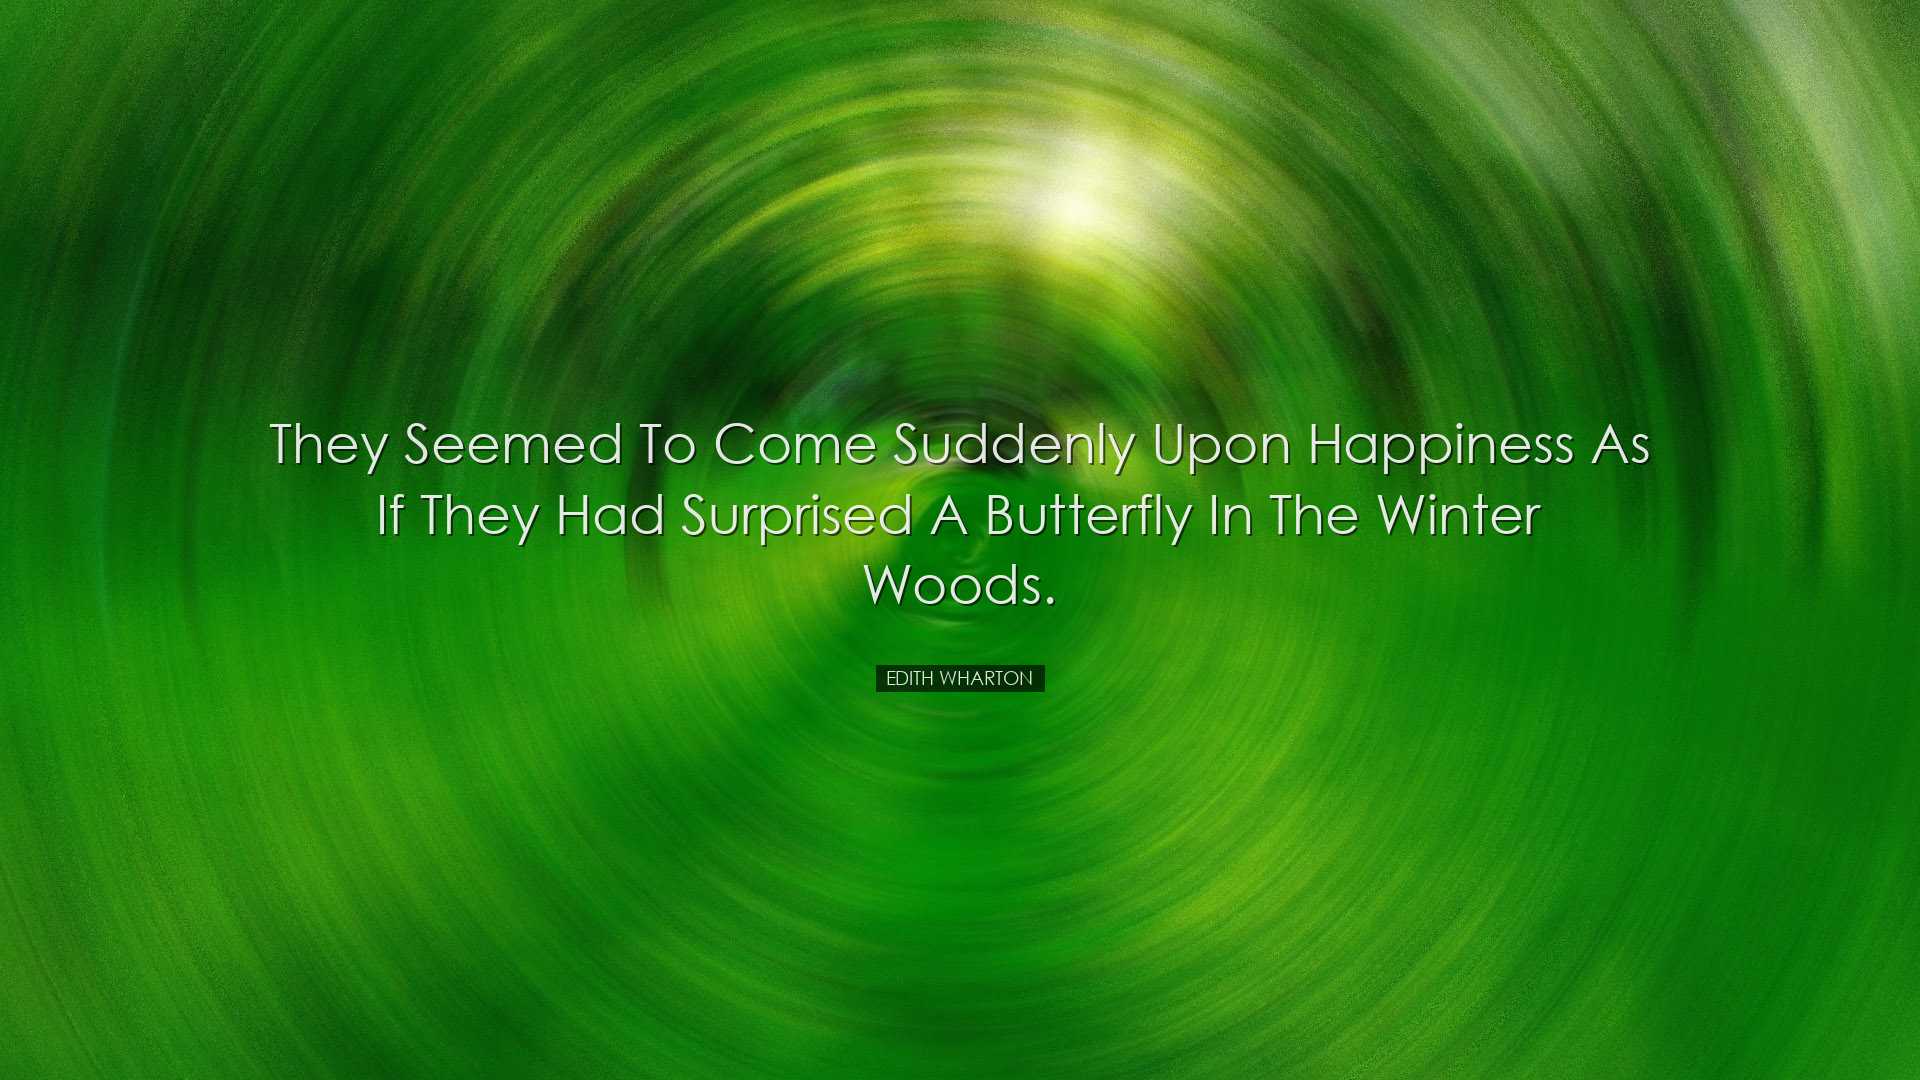 They seemed to come suddenly upon happiness as if they had surpris